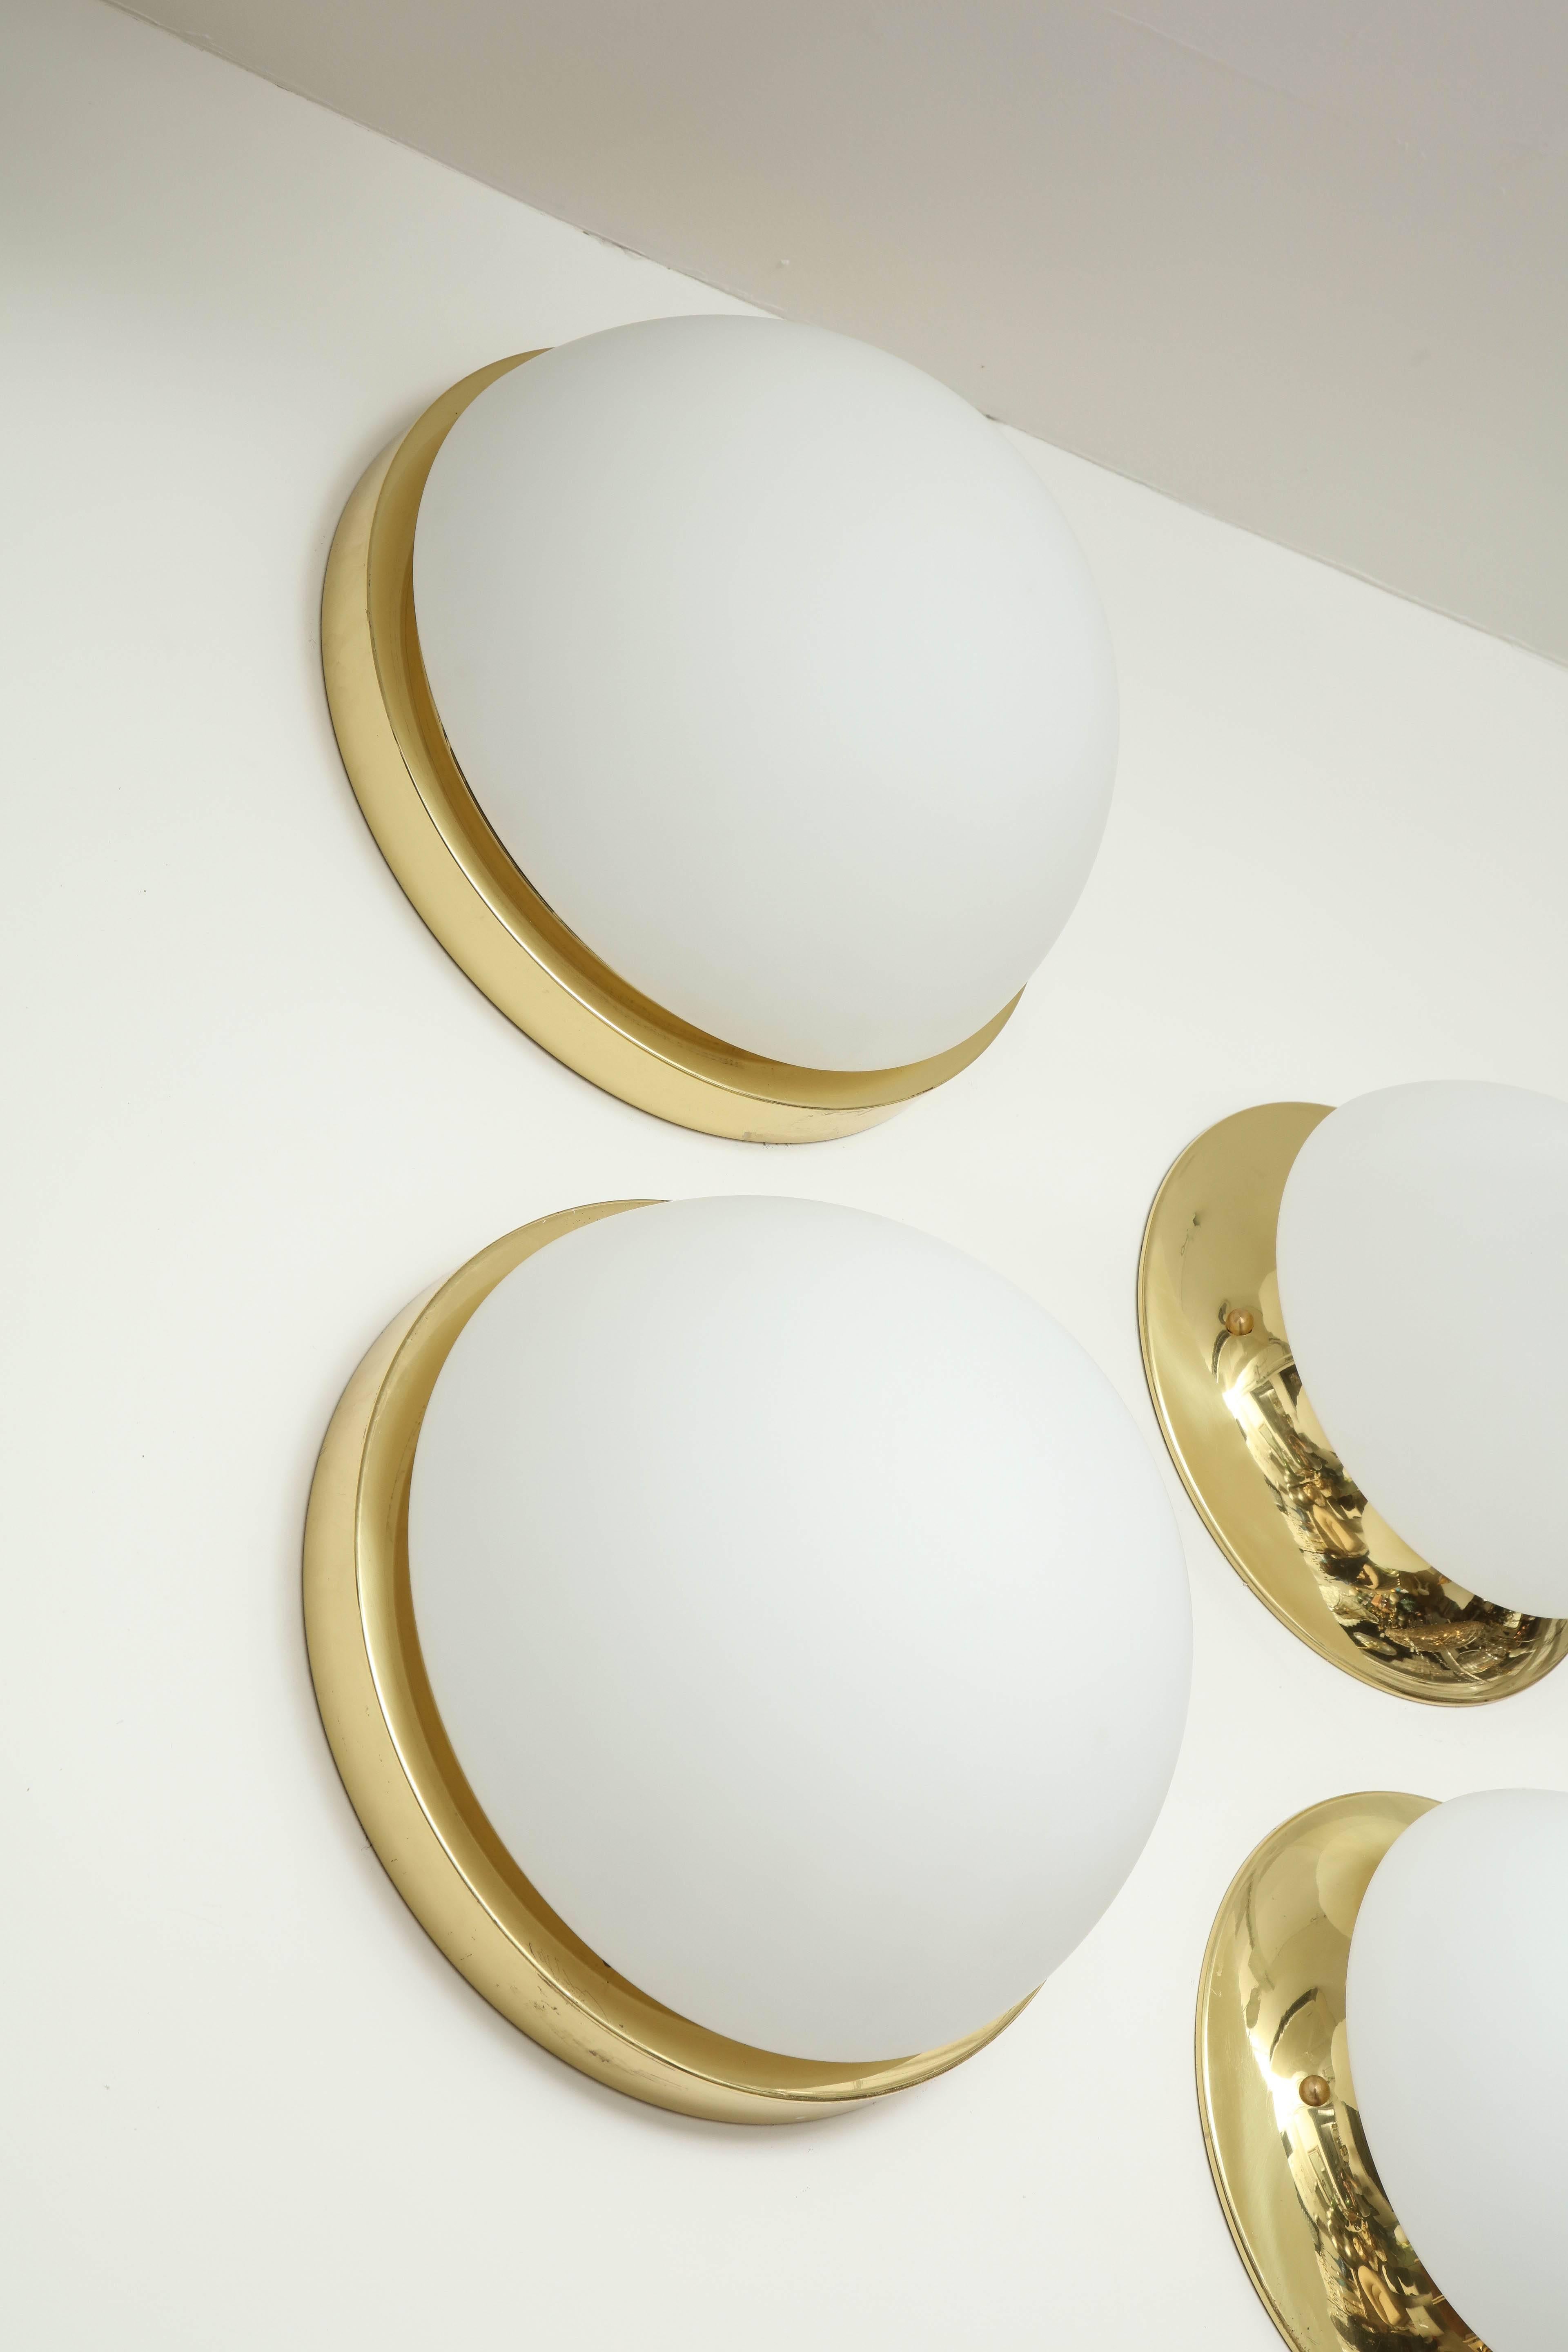 Pair of Minimalist polished brass and frosted glass flush mounts 
by Limburg.
The polished brass armature supports the frosted glass dome and is illuminated by two-light sources which have been newly rewired for the US and each socket has a 40